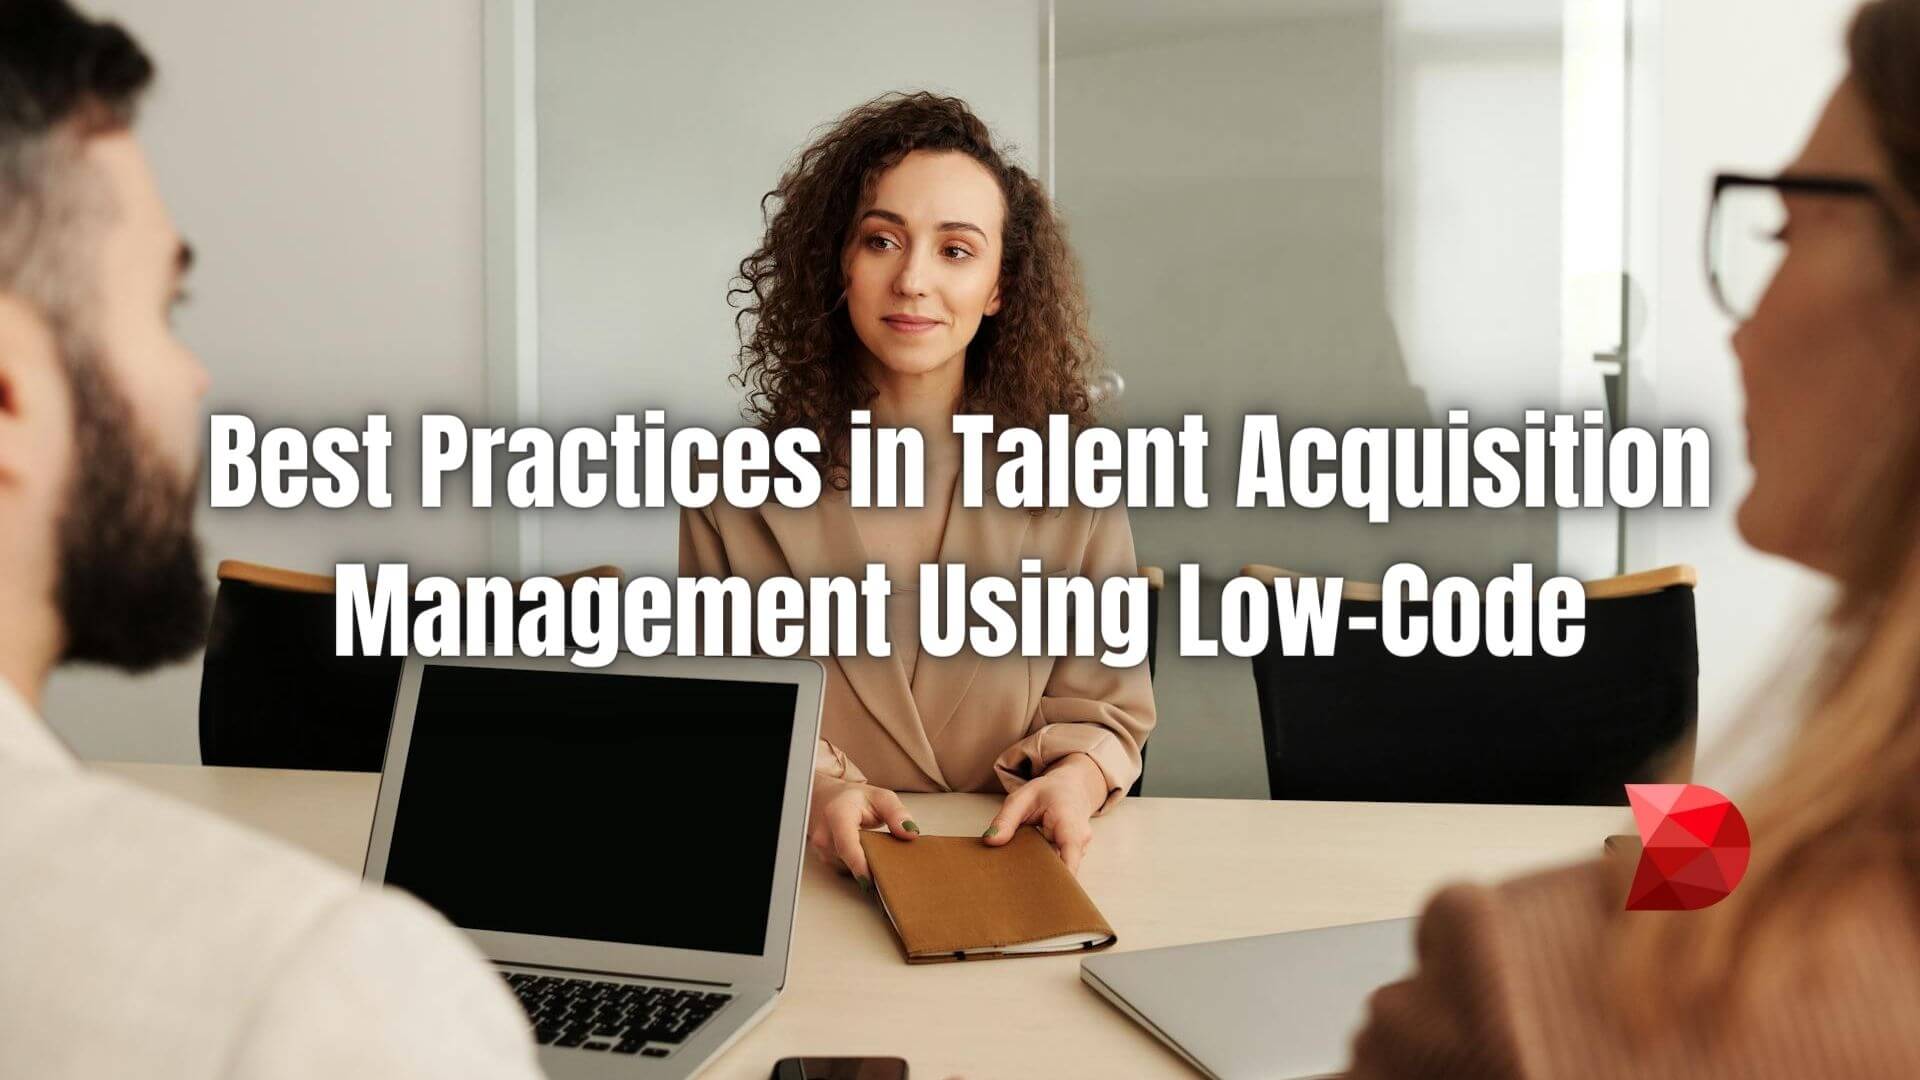 Streamline your processes efficiently! Unlock the potential of low-code talent acquisition management with our guide to best practices.